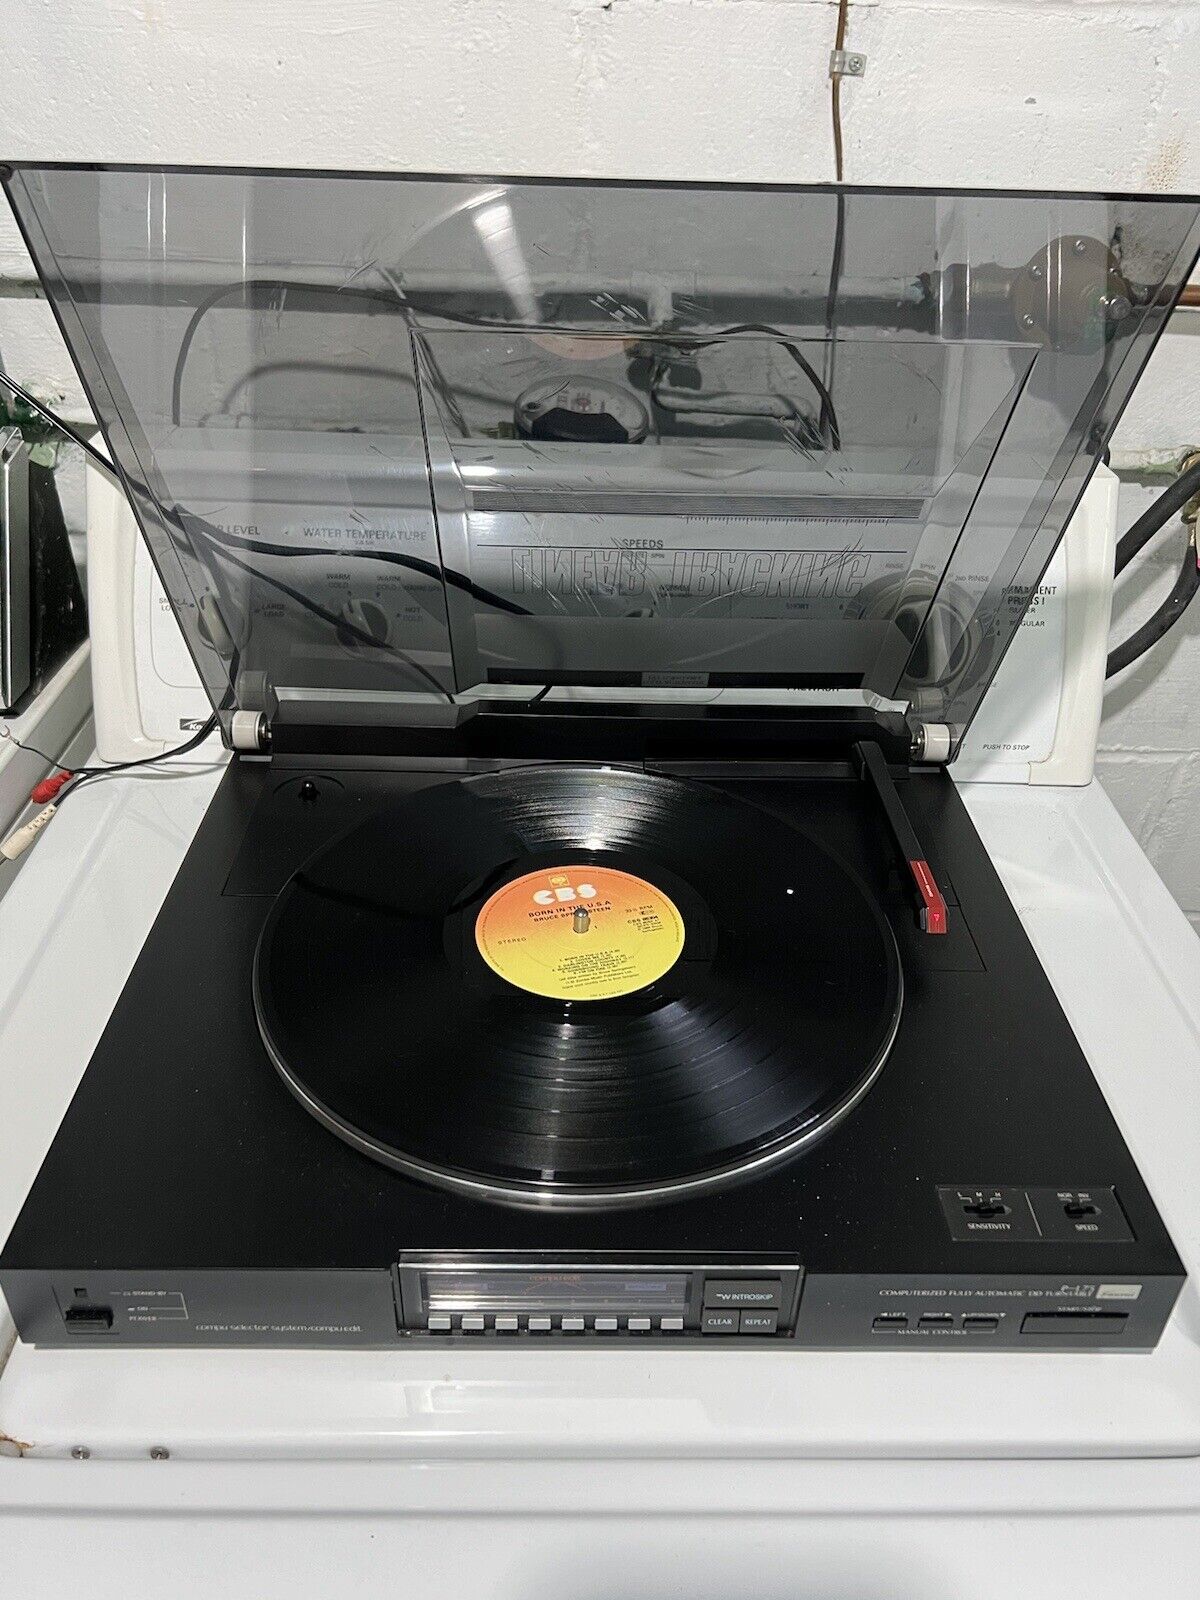 Sansui P-L75 Fully Automatic Direct Drive Turntable SEE Description . As Is